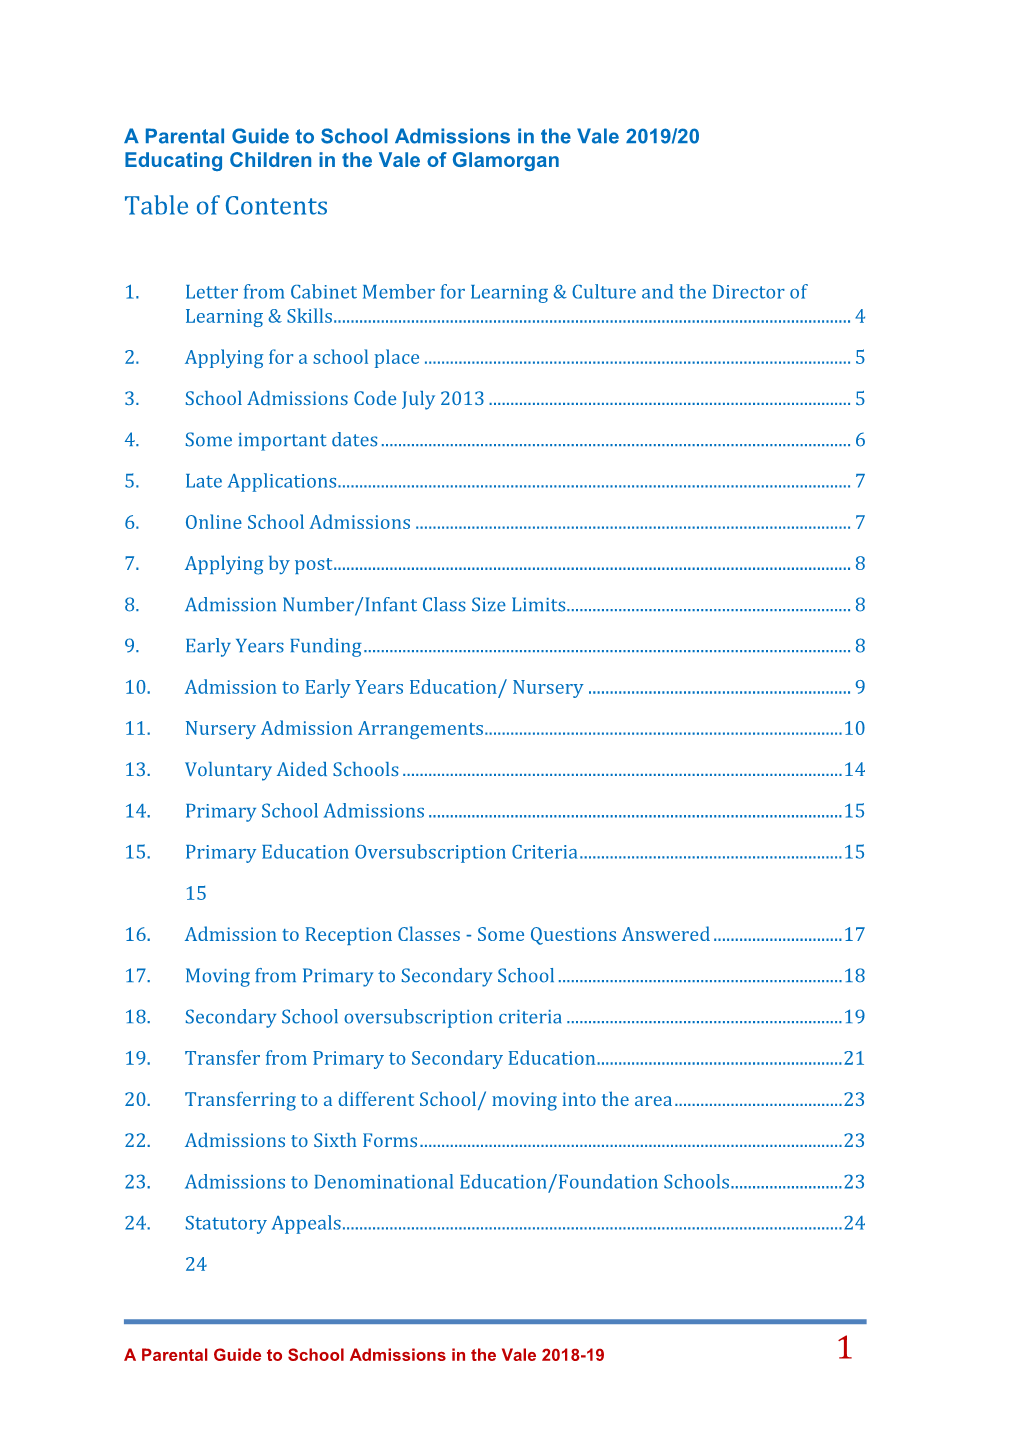 A Parental Guide to School Admissions in the Vale 2019/20 Educating Children in the Vale of Glamorgan Table of Contents